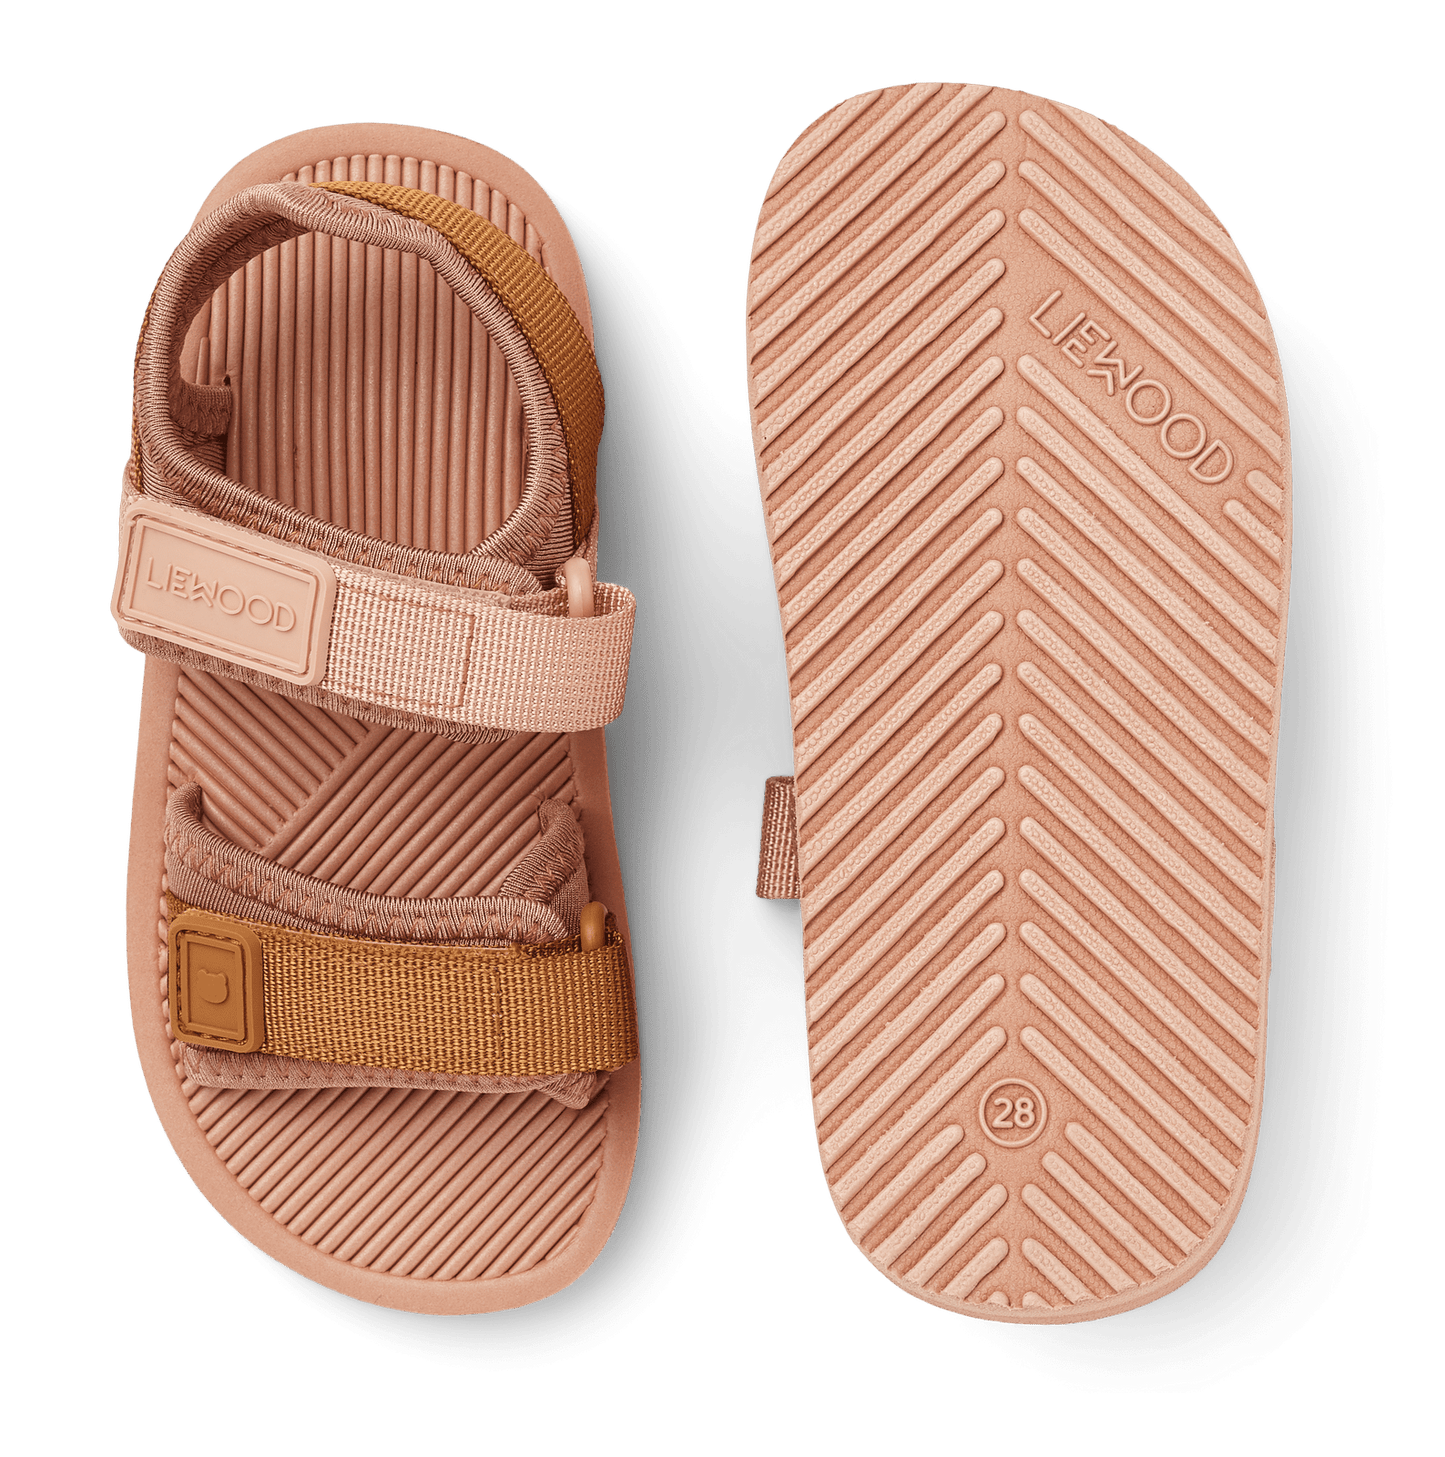 Liewood Monty Sandals, Liewood Monty Sandals Rose Mix, Sandals Liewood, Kids Summer Sandals, Kids Beach Shoes, Children’s Holiday Shoes, Liewood Stockist, Nottinghamshire Independent Children’s Store 